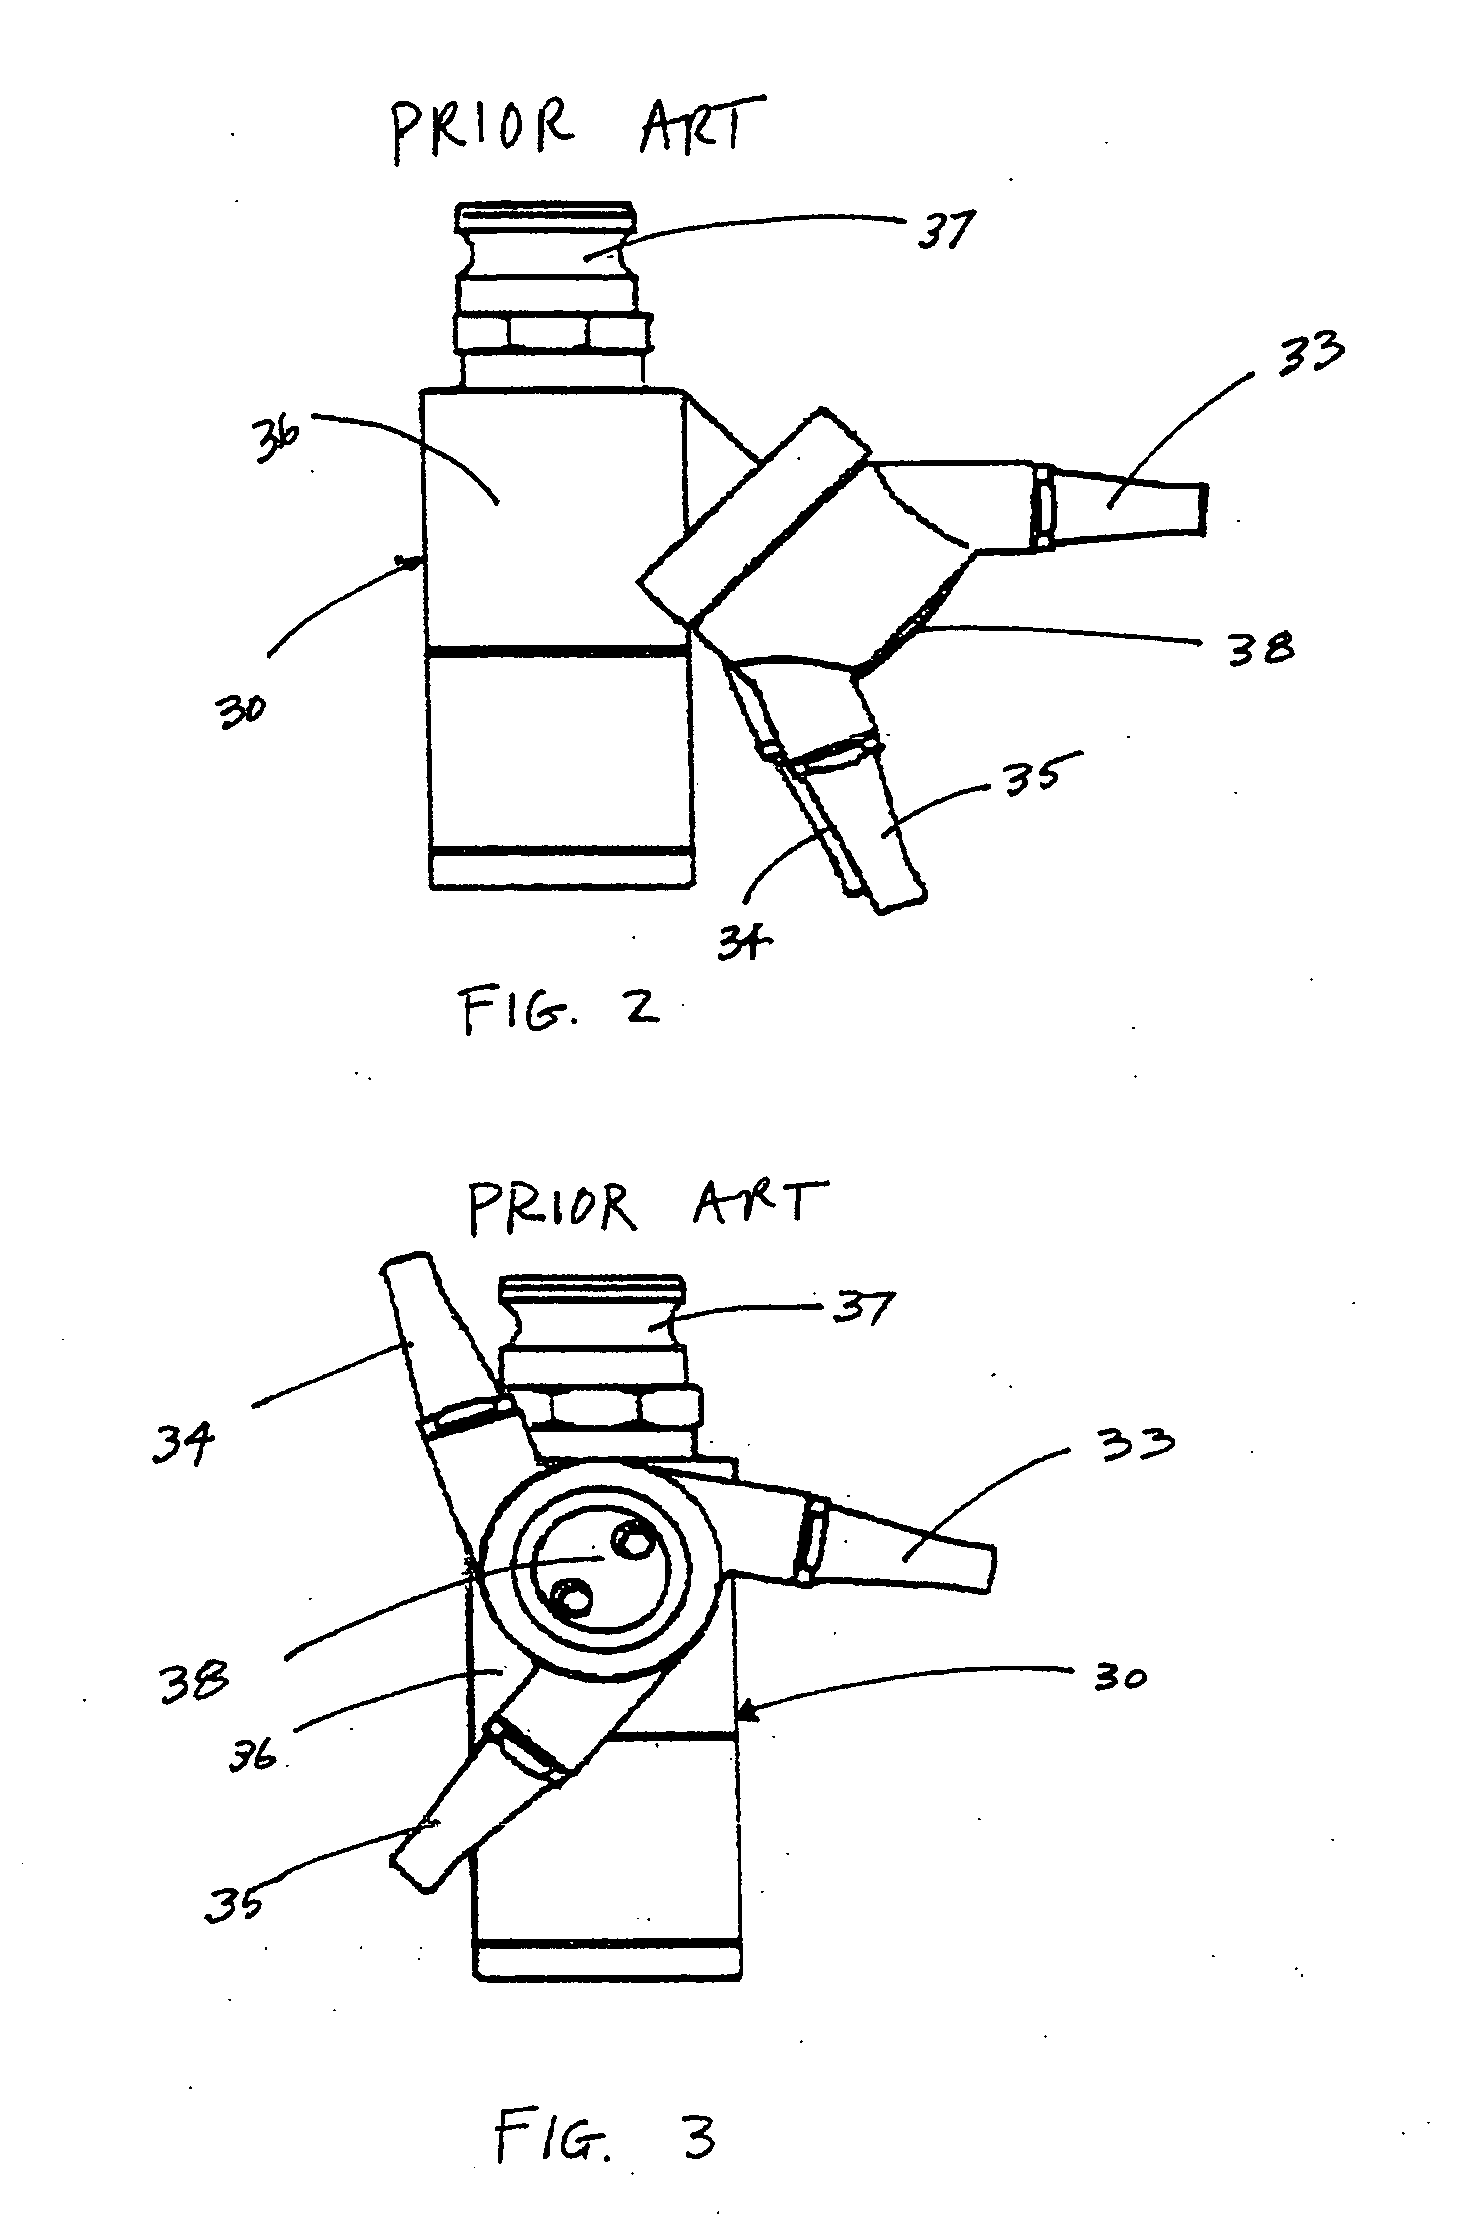 Method and apparatus for cleaning tanks and other containers